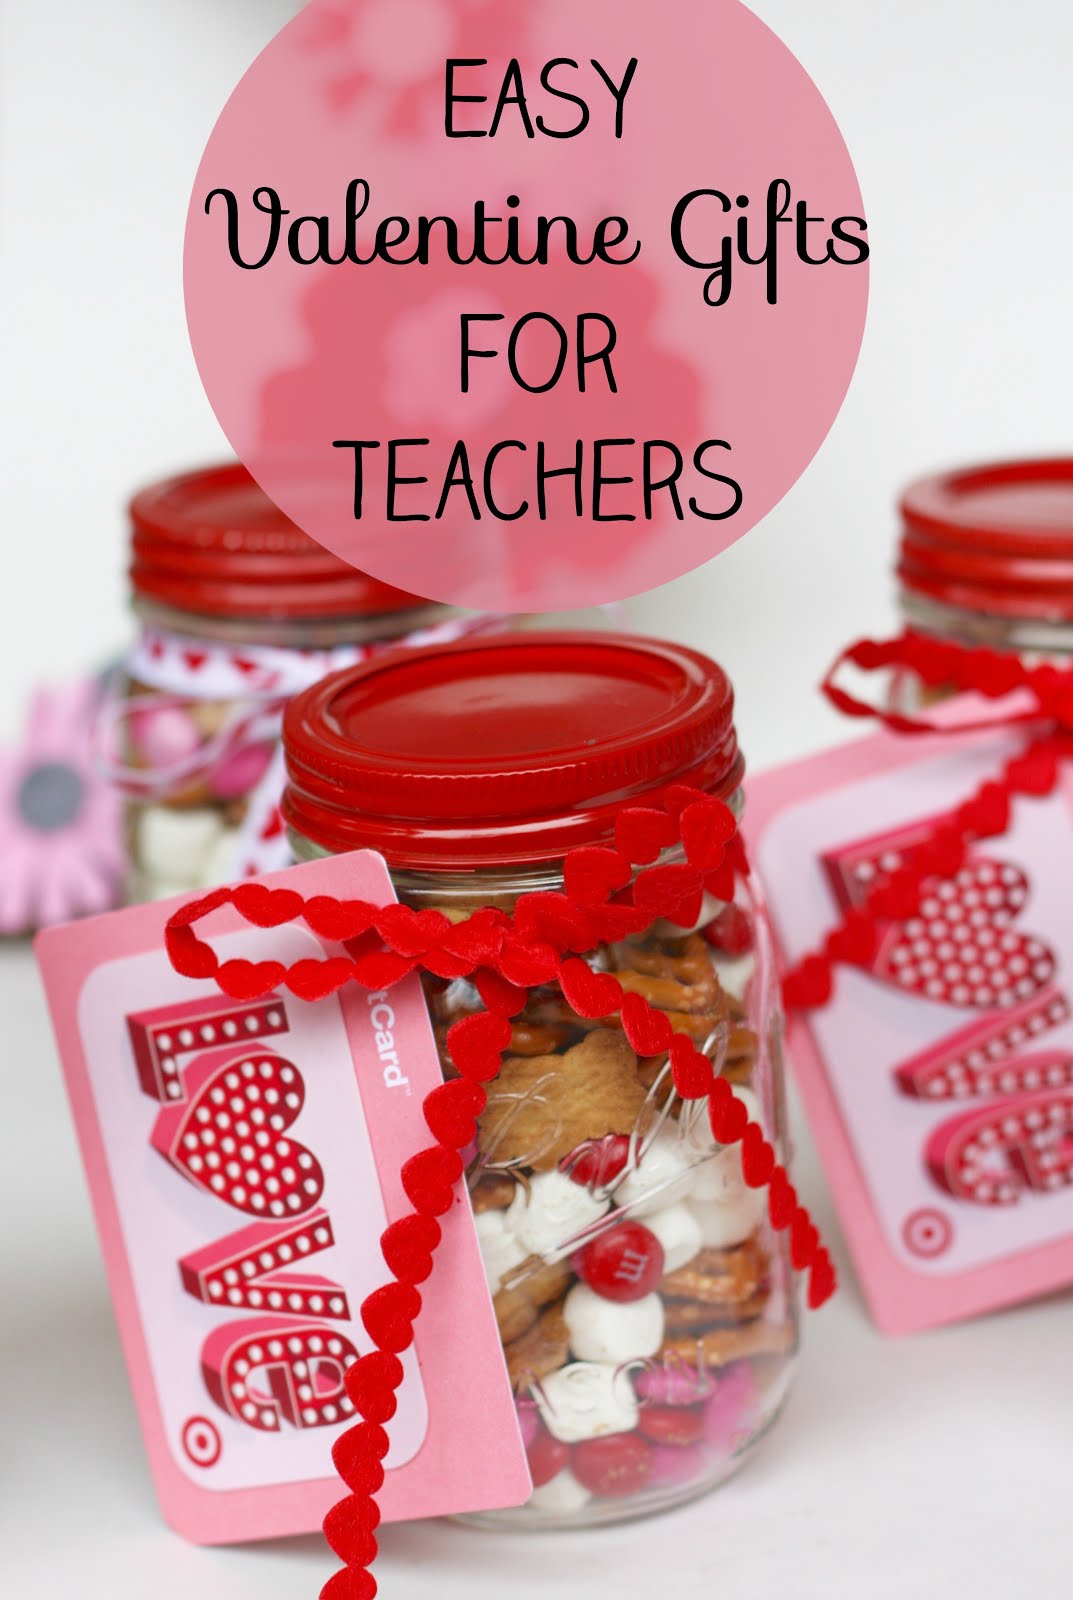 Valentine's Snack Mix for Cute Little Gifts!